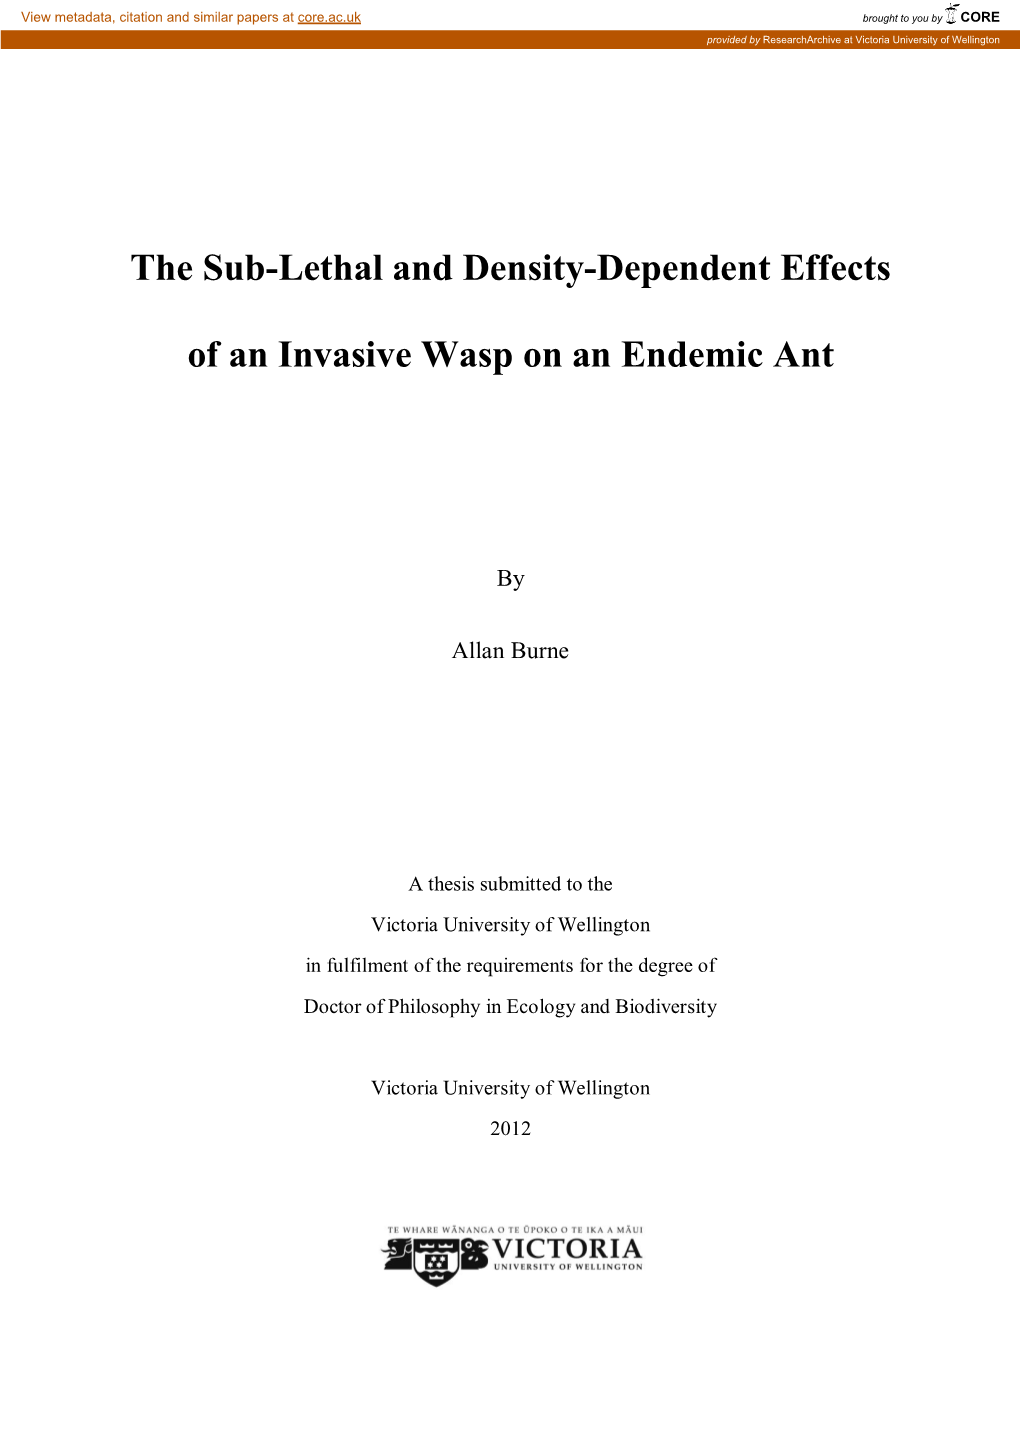 The Sub-Lethal and Density-Dependent Effects of An